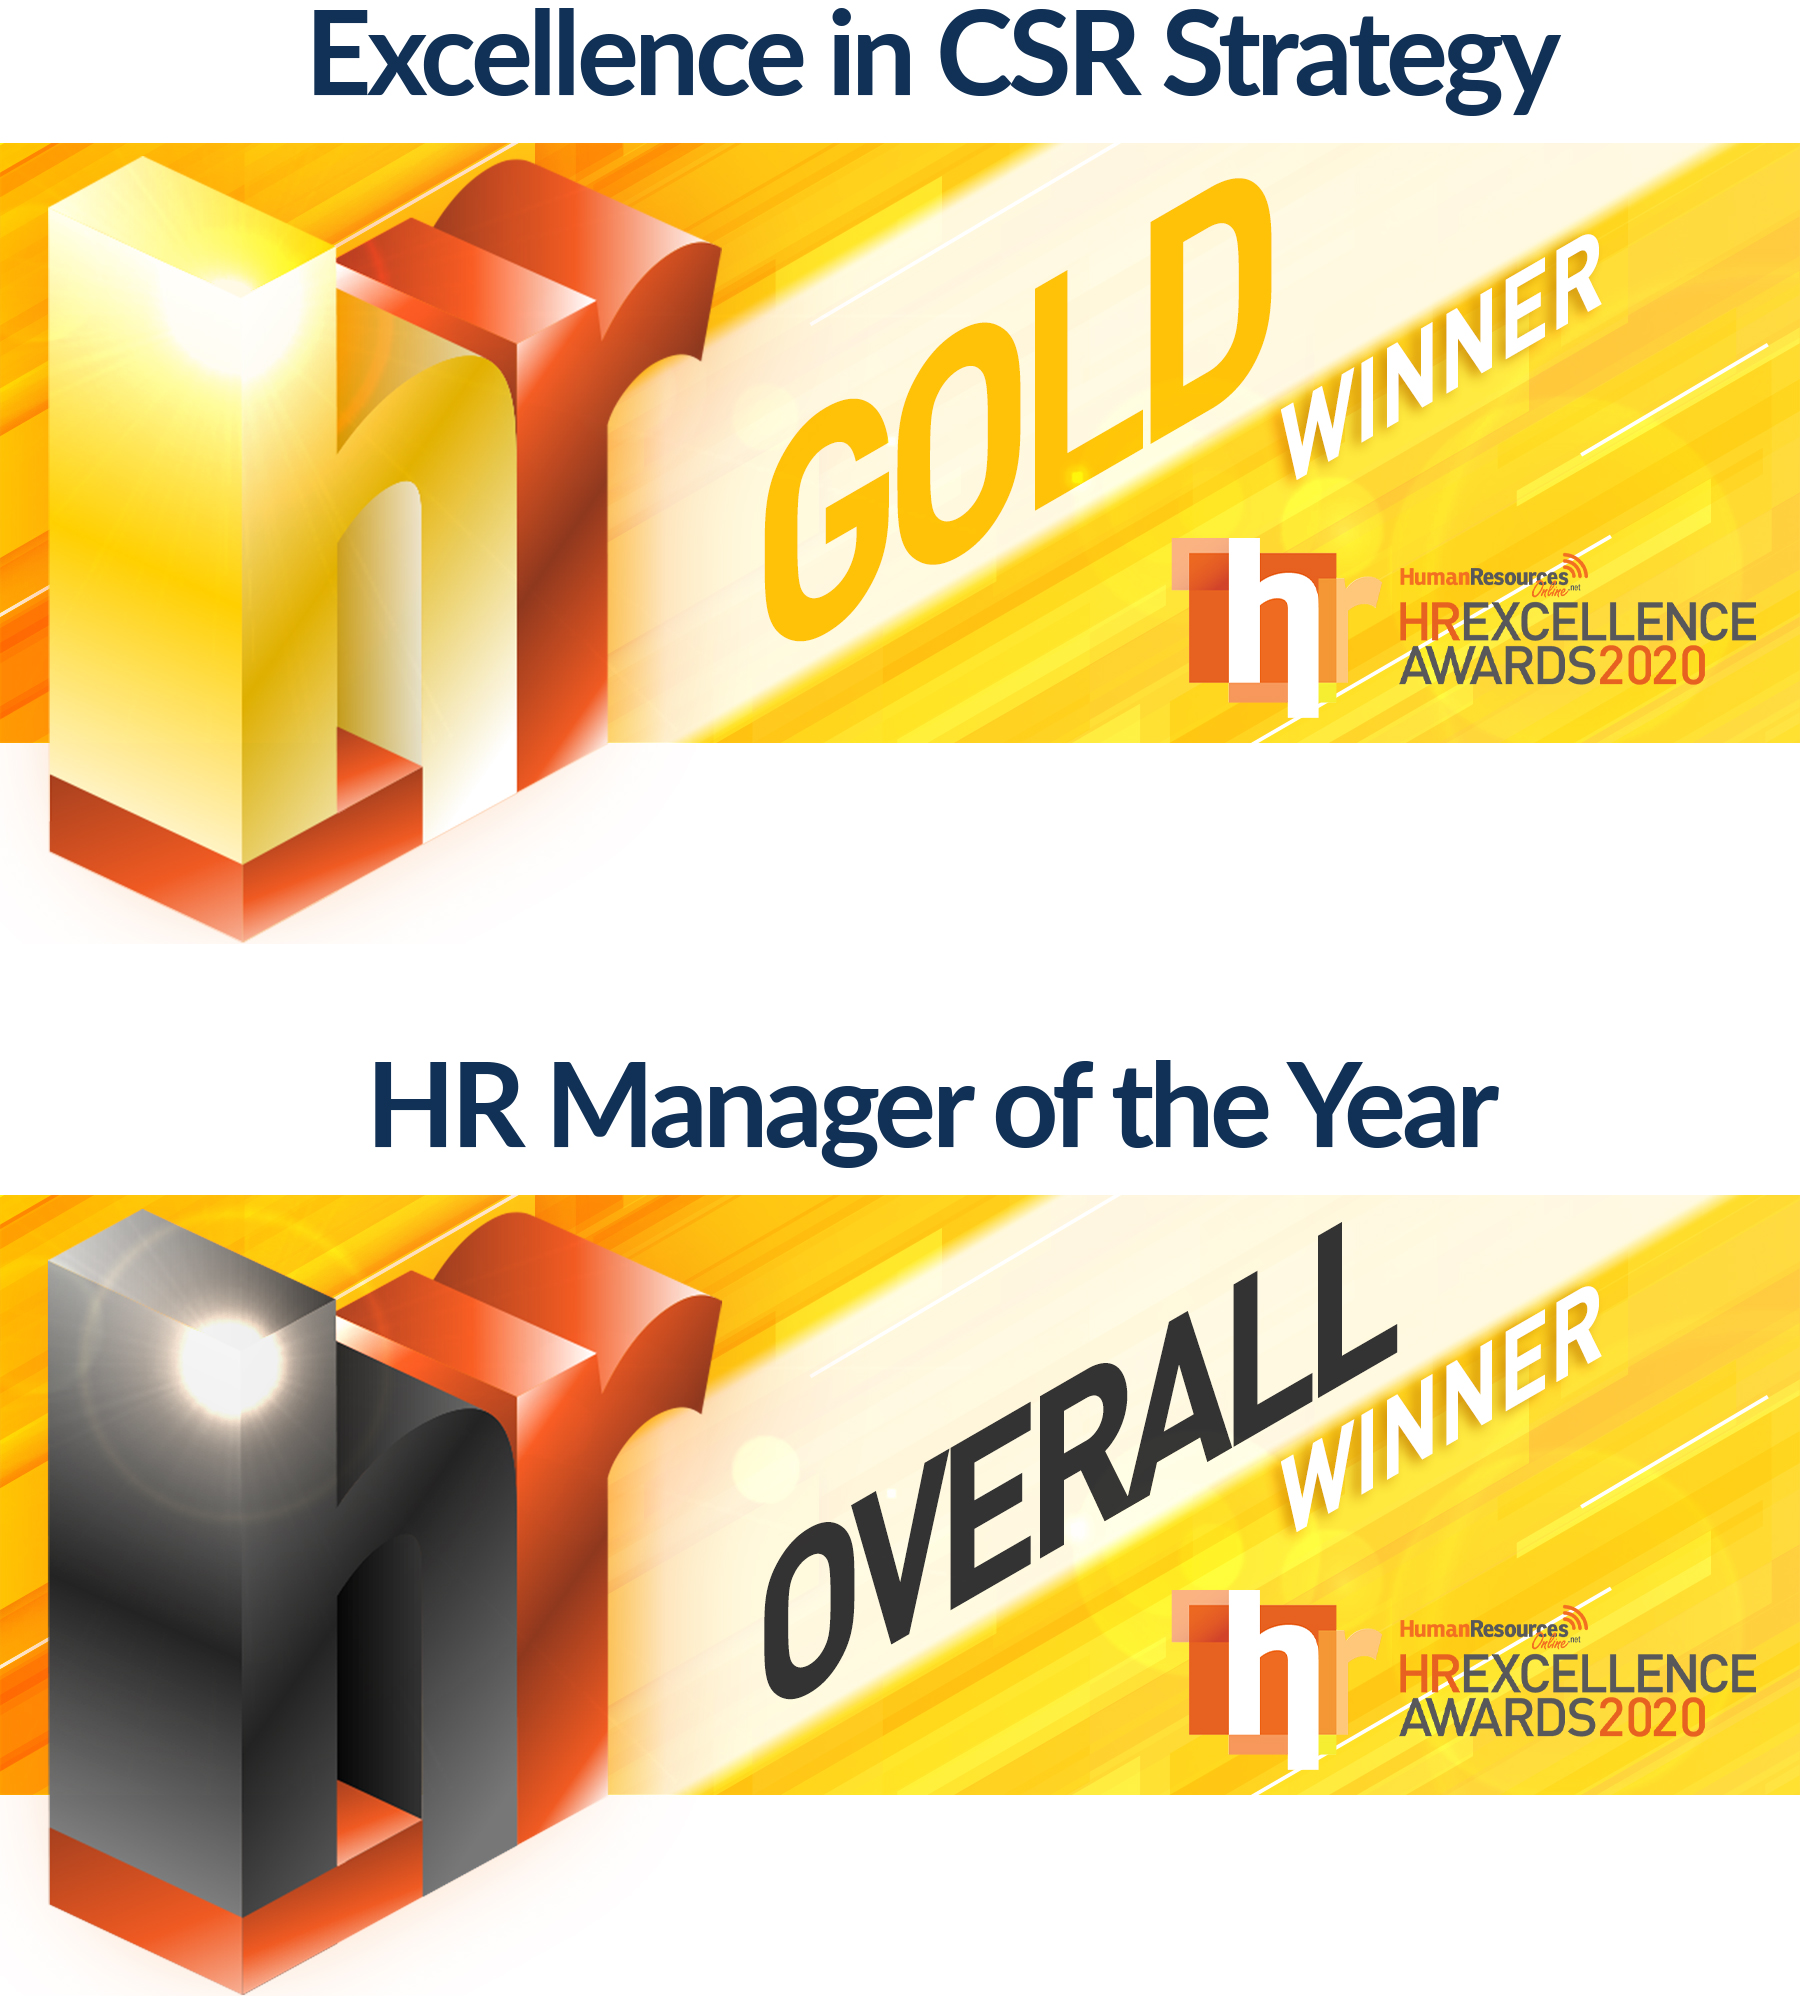 HR Excellence Awards - Excellence in CSR Strategy & HR Manager of the Year